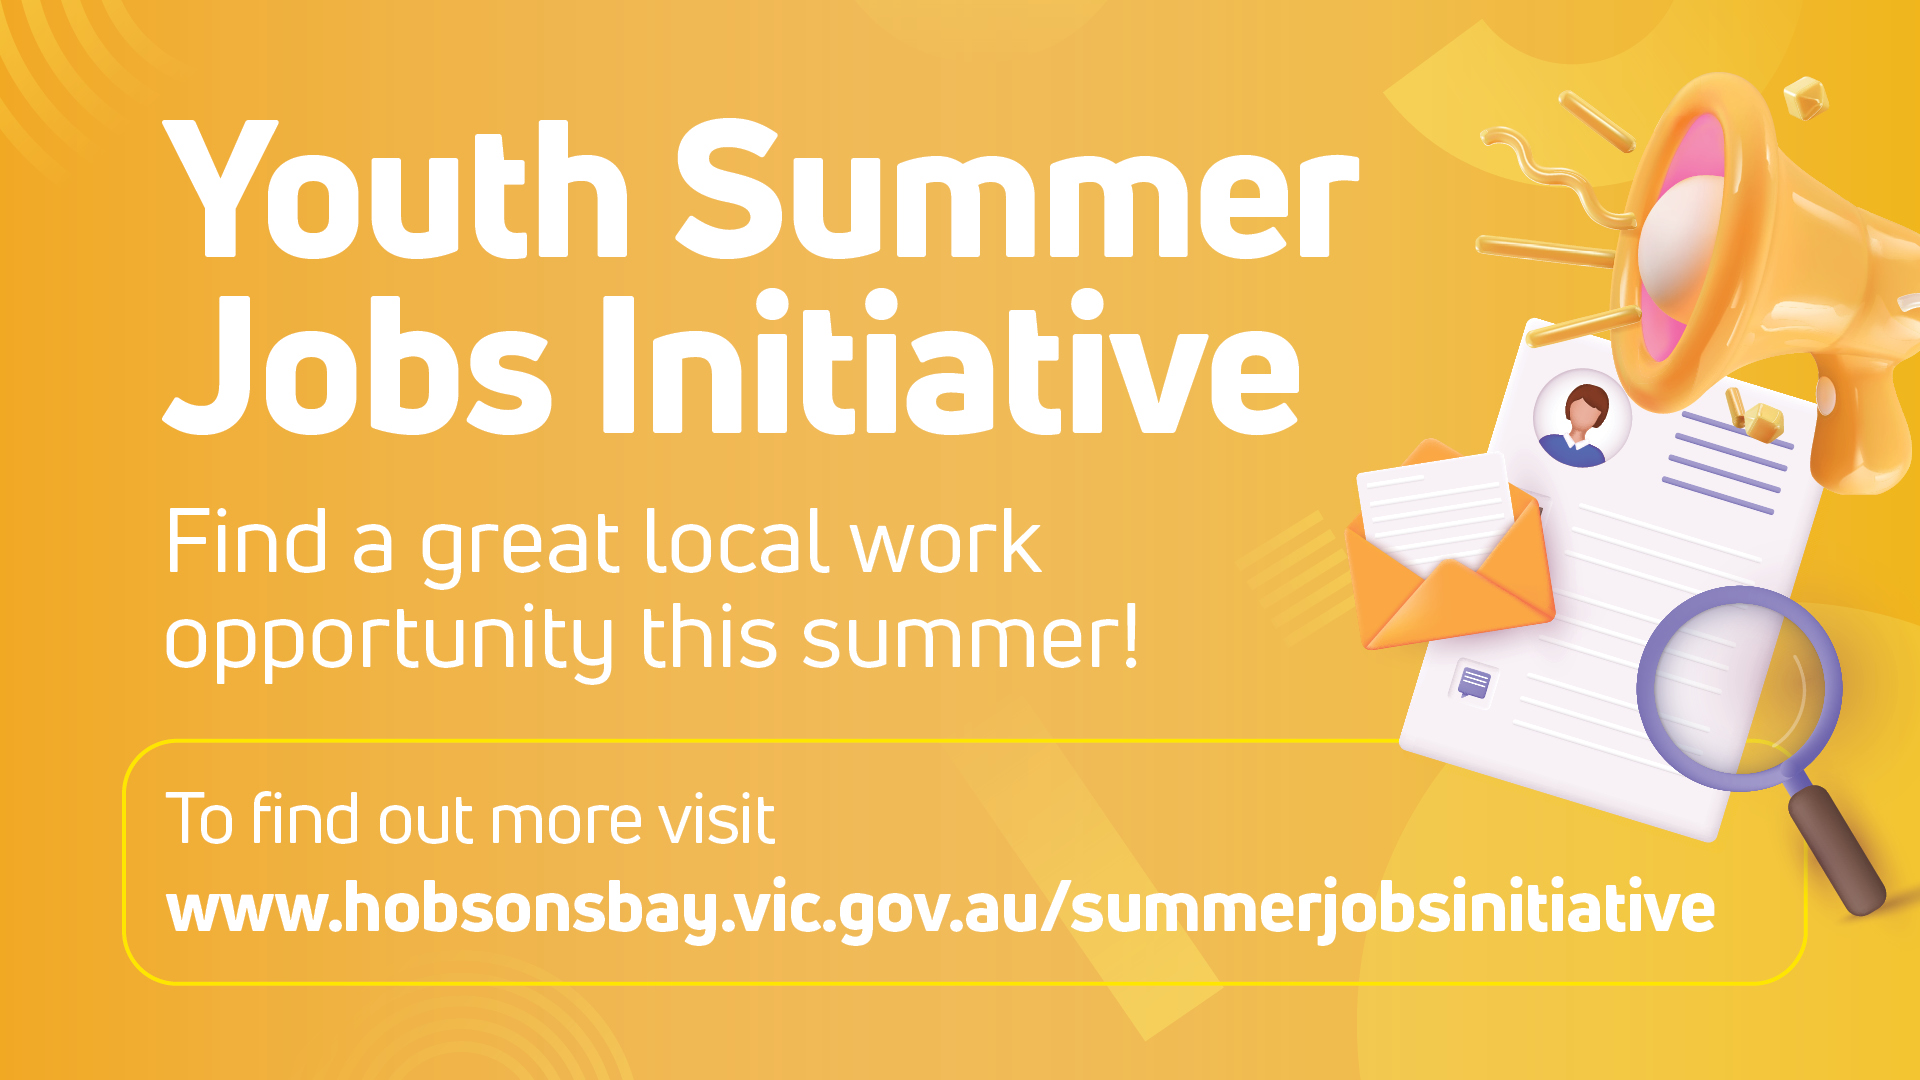 Youth Summer Jobs Initiative